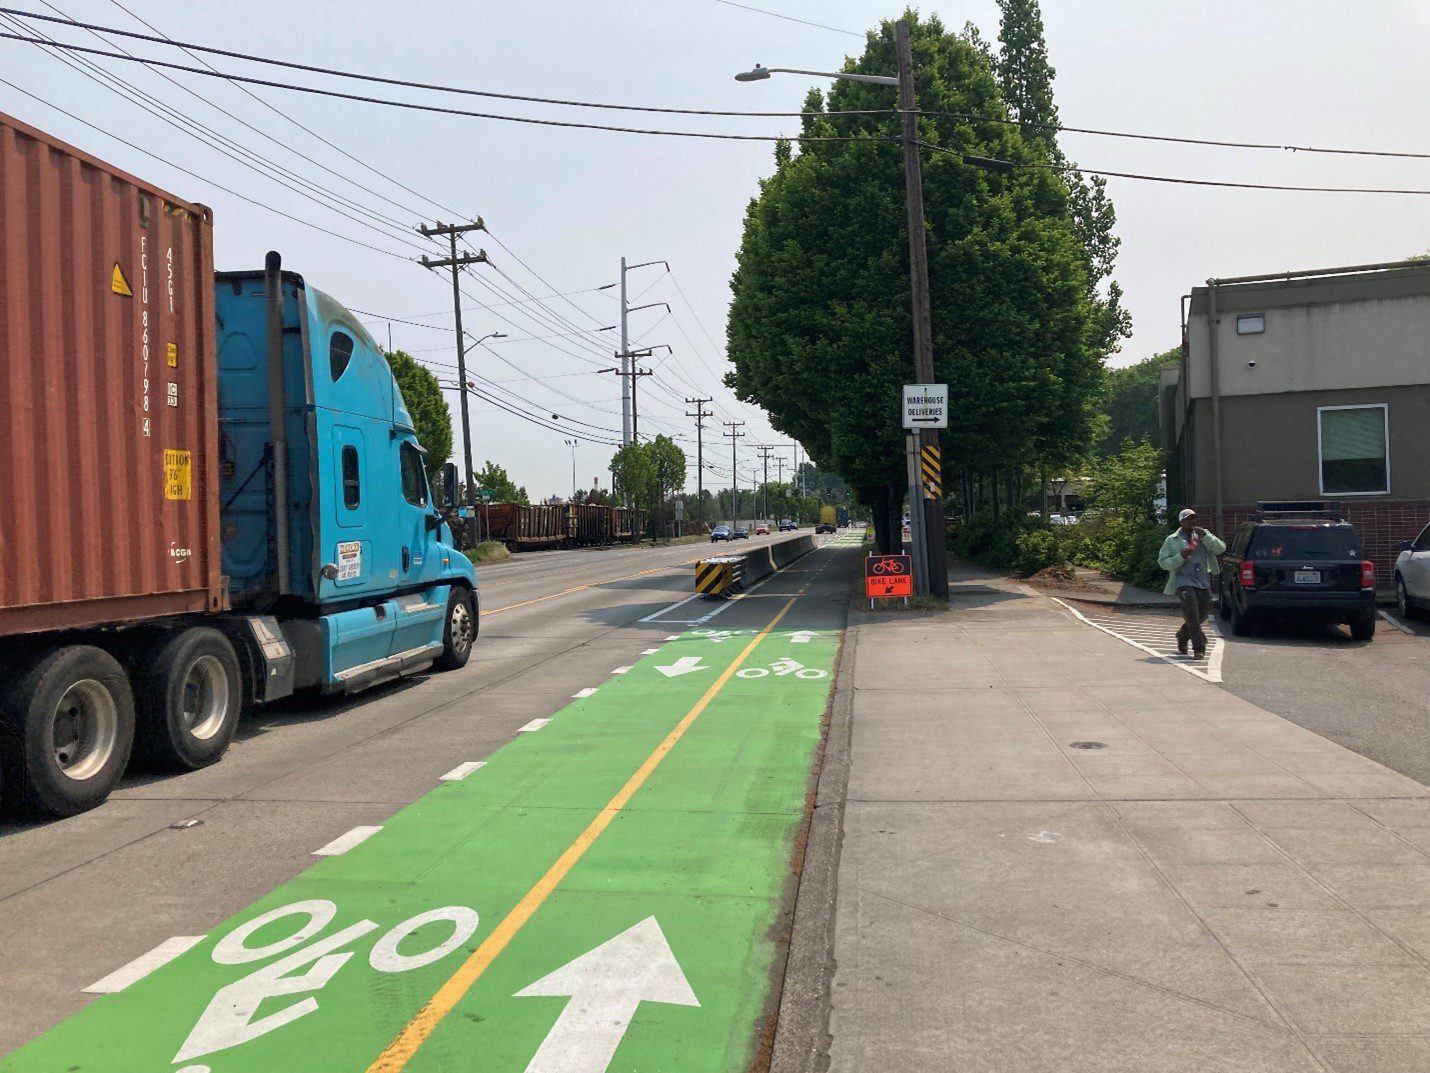 A large semi-truck hauling freight cargo travels to the left of the photo. A green protected bike lane at a driveway crossing is in the middle of the photo. A man walks at the sidewalk to the right of the photo next to parked cars and a building. Large trees are in the background.